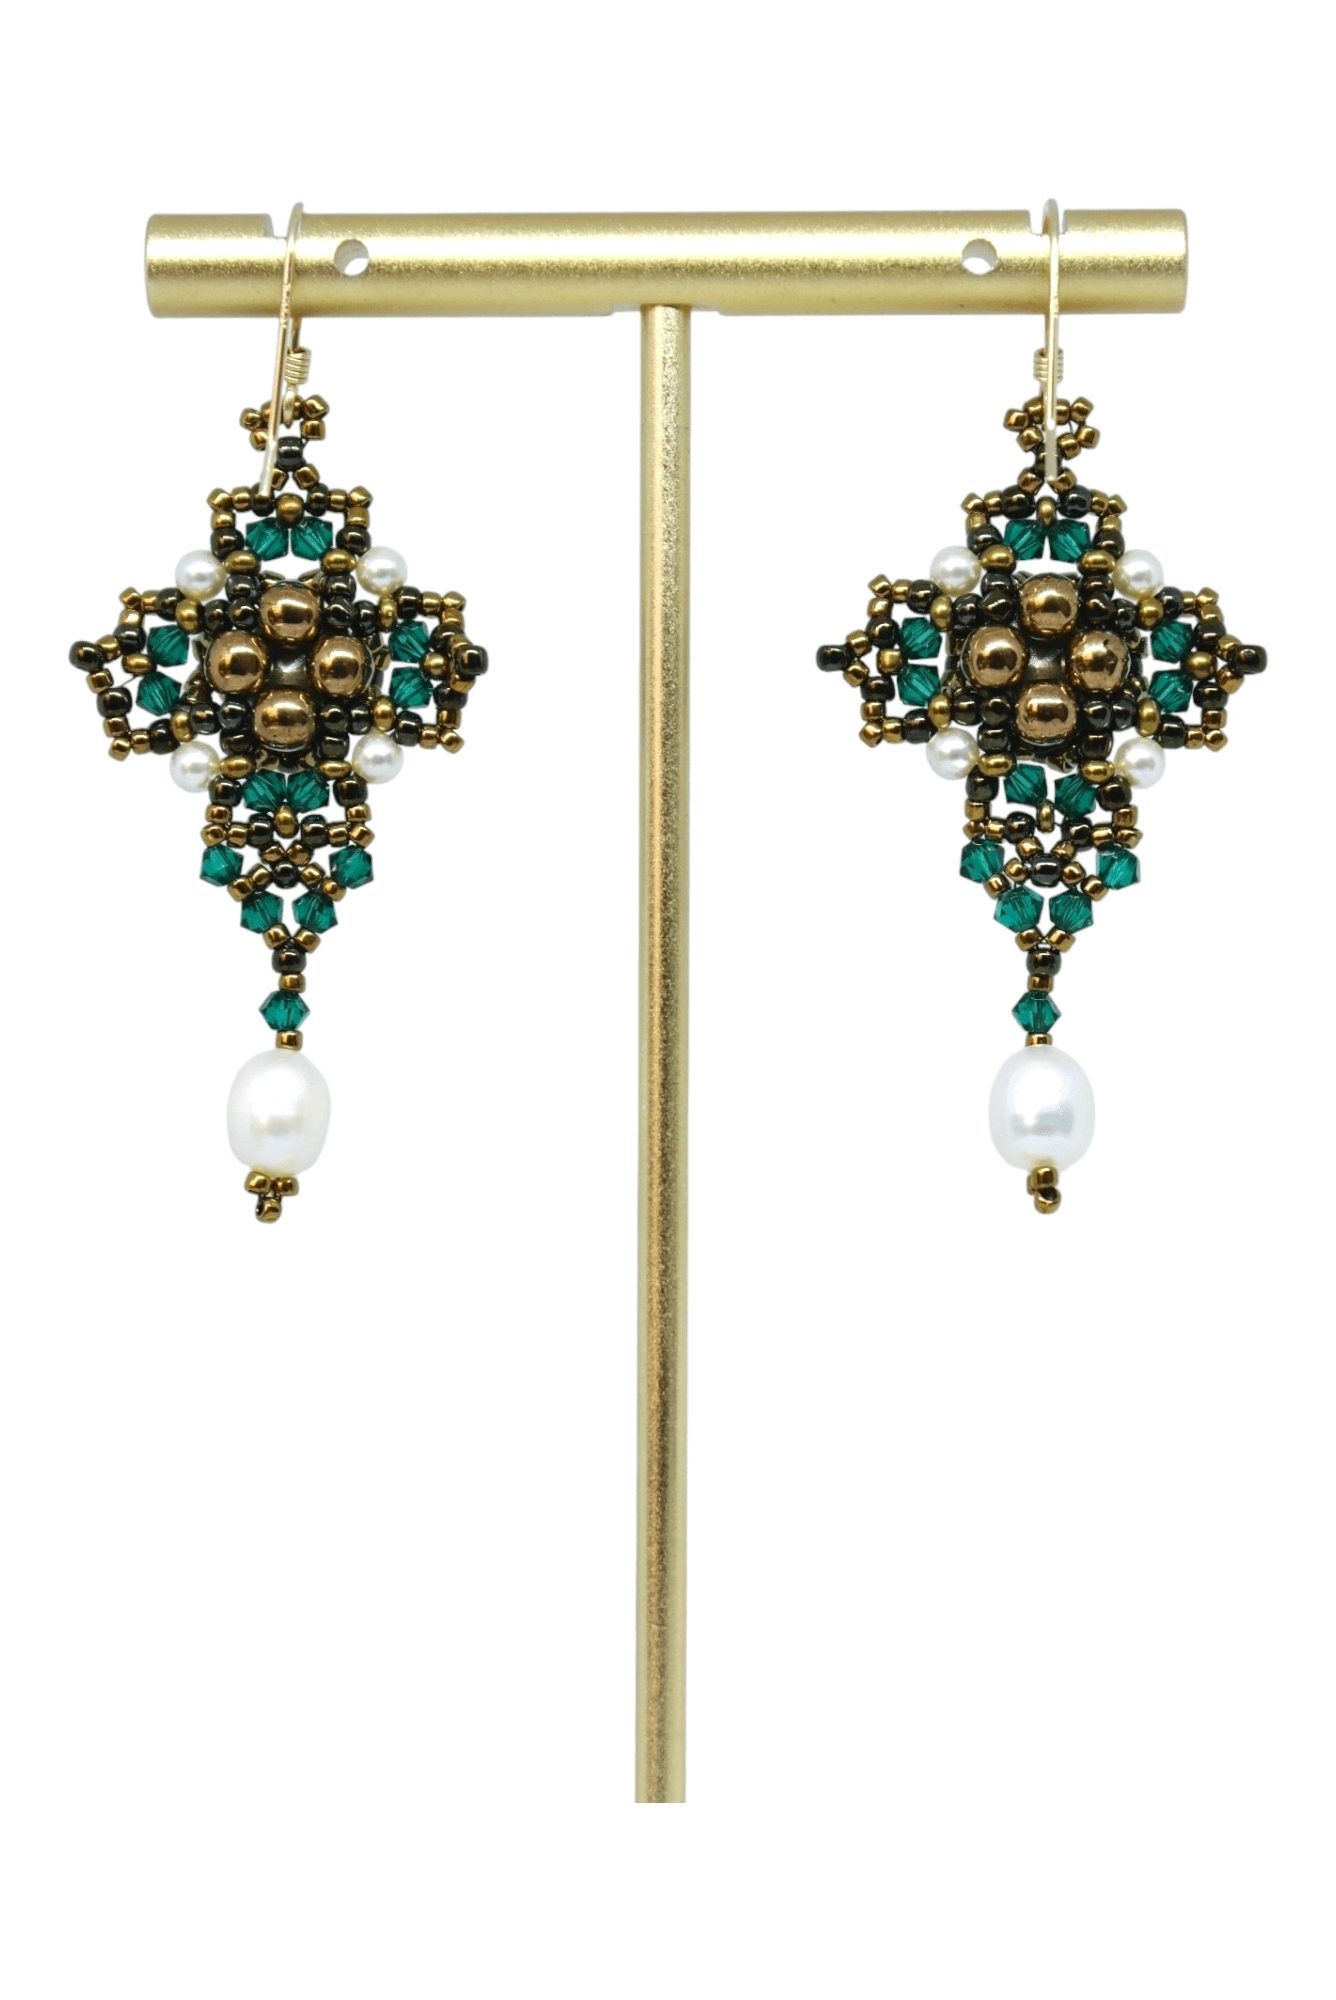 Emerald Green Crystal Cross Earrings - Back View - Verde Esmeralda Jewelry Collection - Kaleidoscopes And Polka Dots